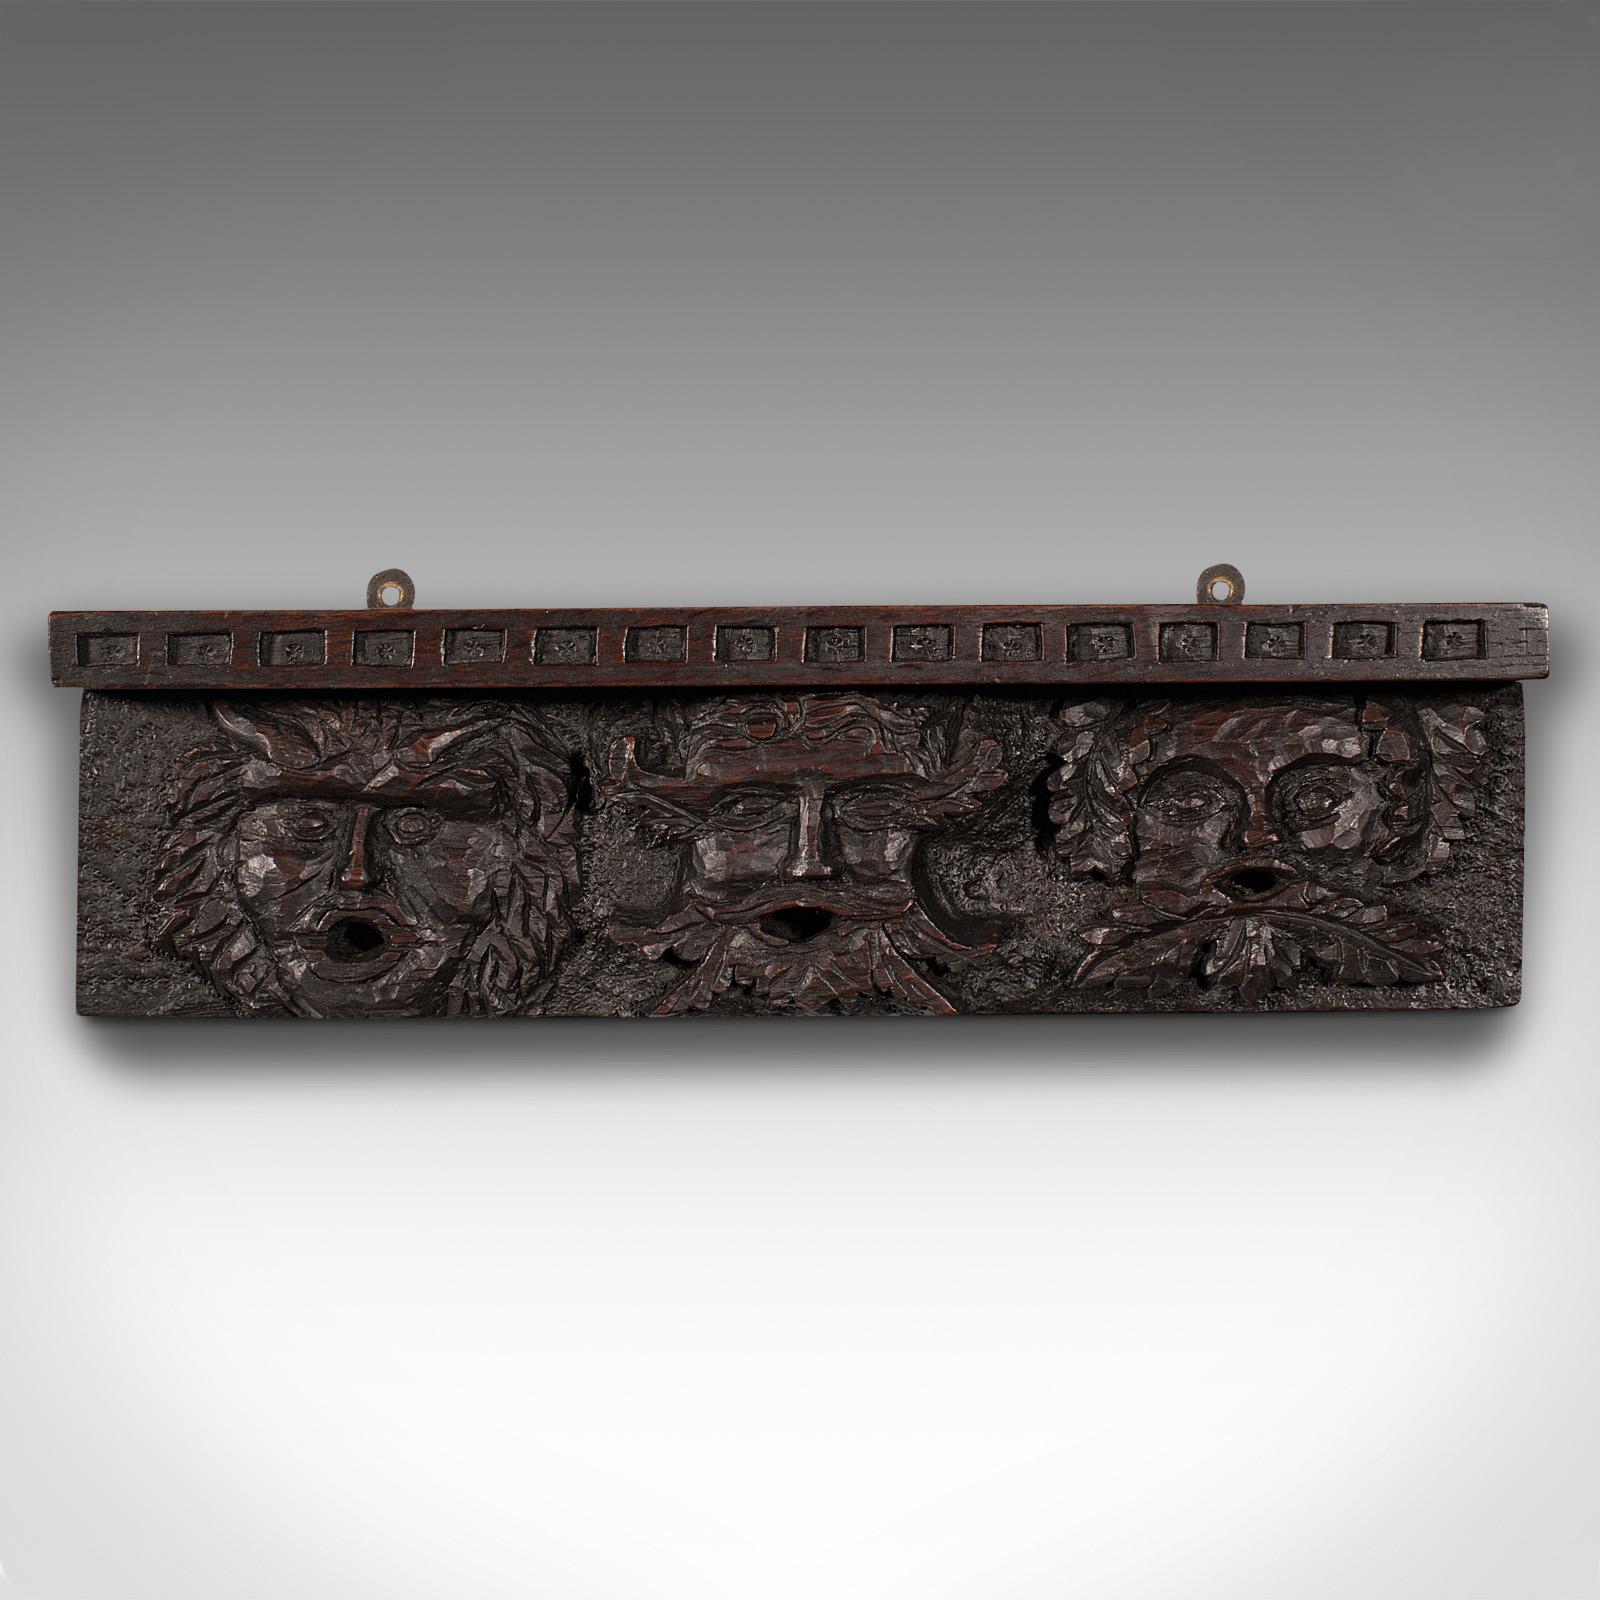 This is an antique decorative wall bracket. An English, carved oak frieze with green man masques in Gothic taste, dating to the Victorian period, circa 1880.

Striking carvings with a trio of mythological portraits
Displays a desirable aged